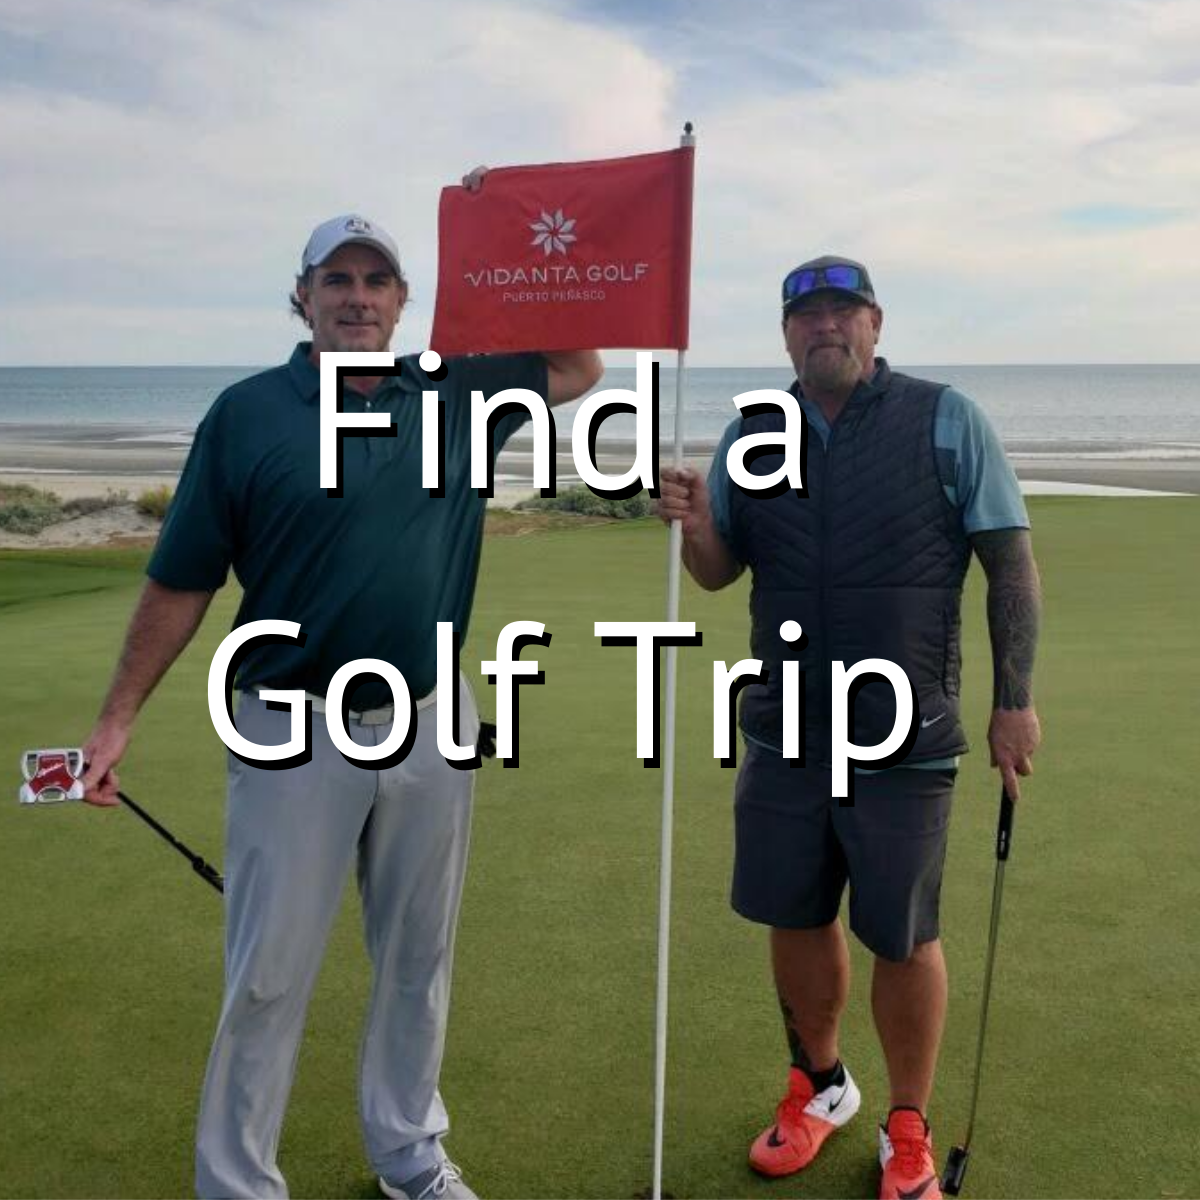 Golf & Grow trips are the best way to take great golf trips with your friends